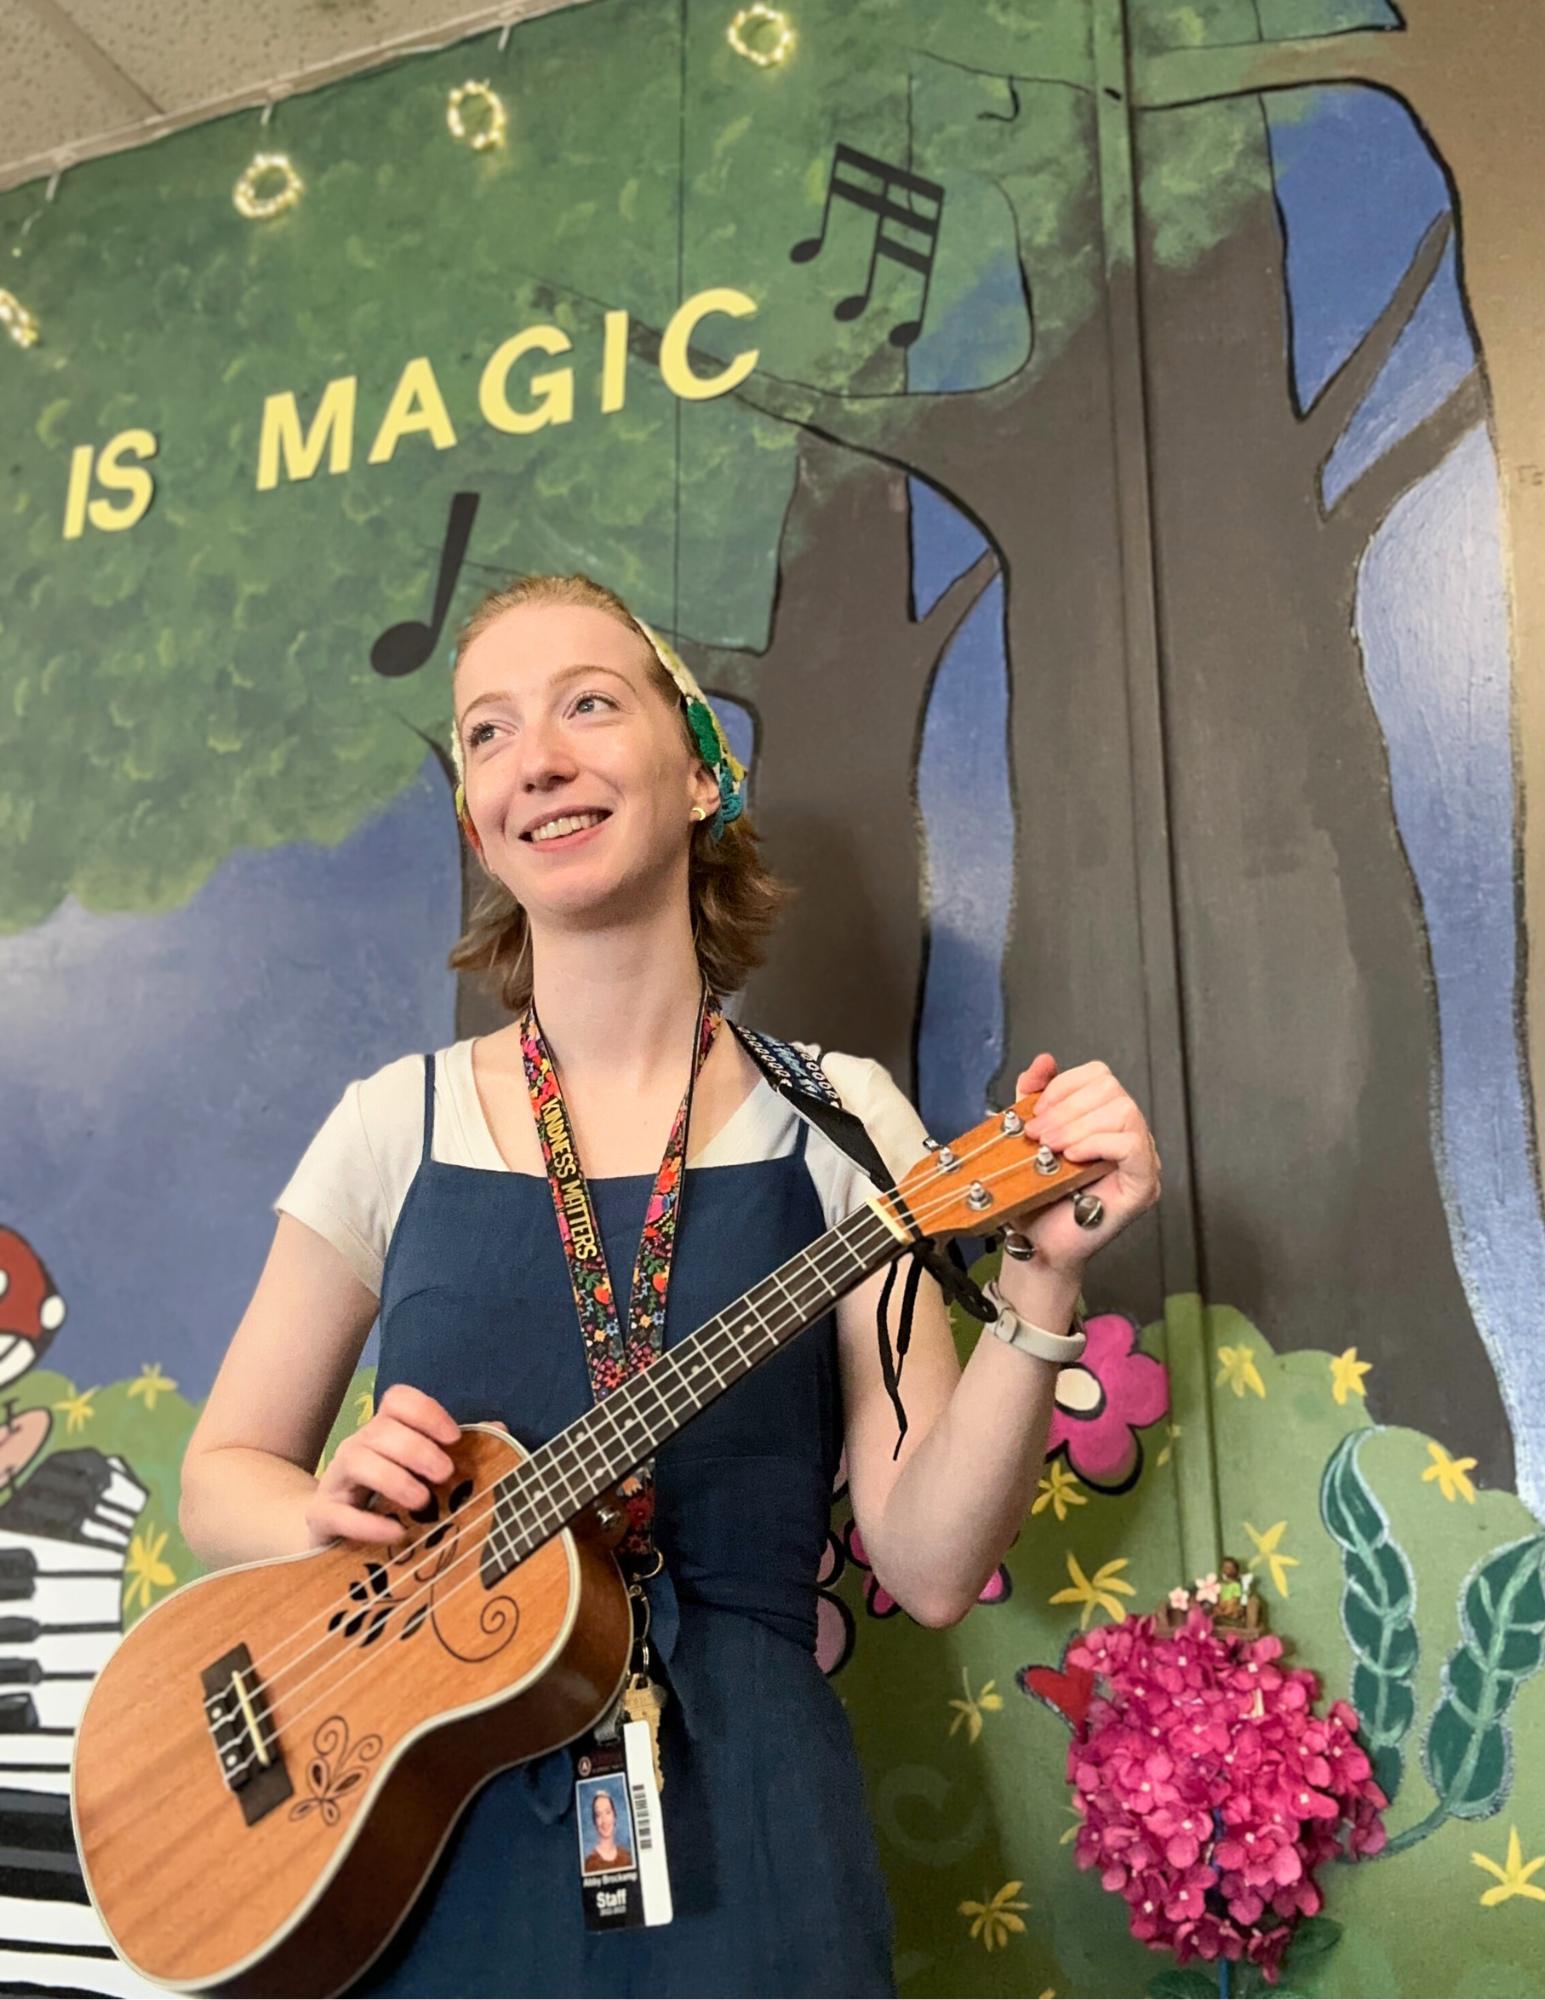 Abby smiling while holding a ukulele in front of her classroom mural